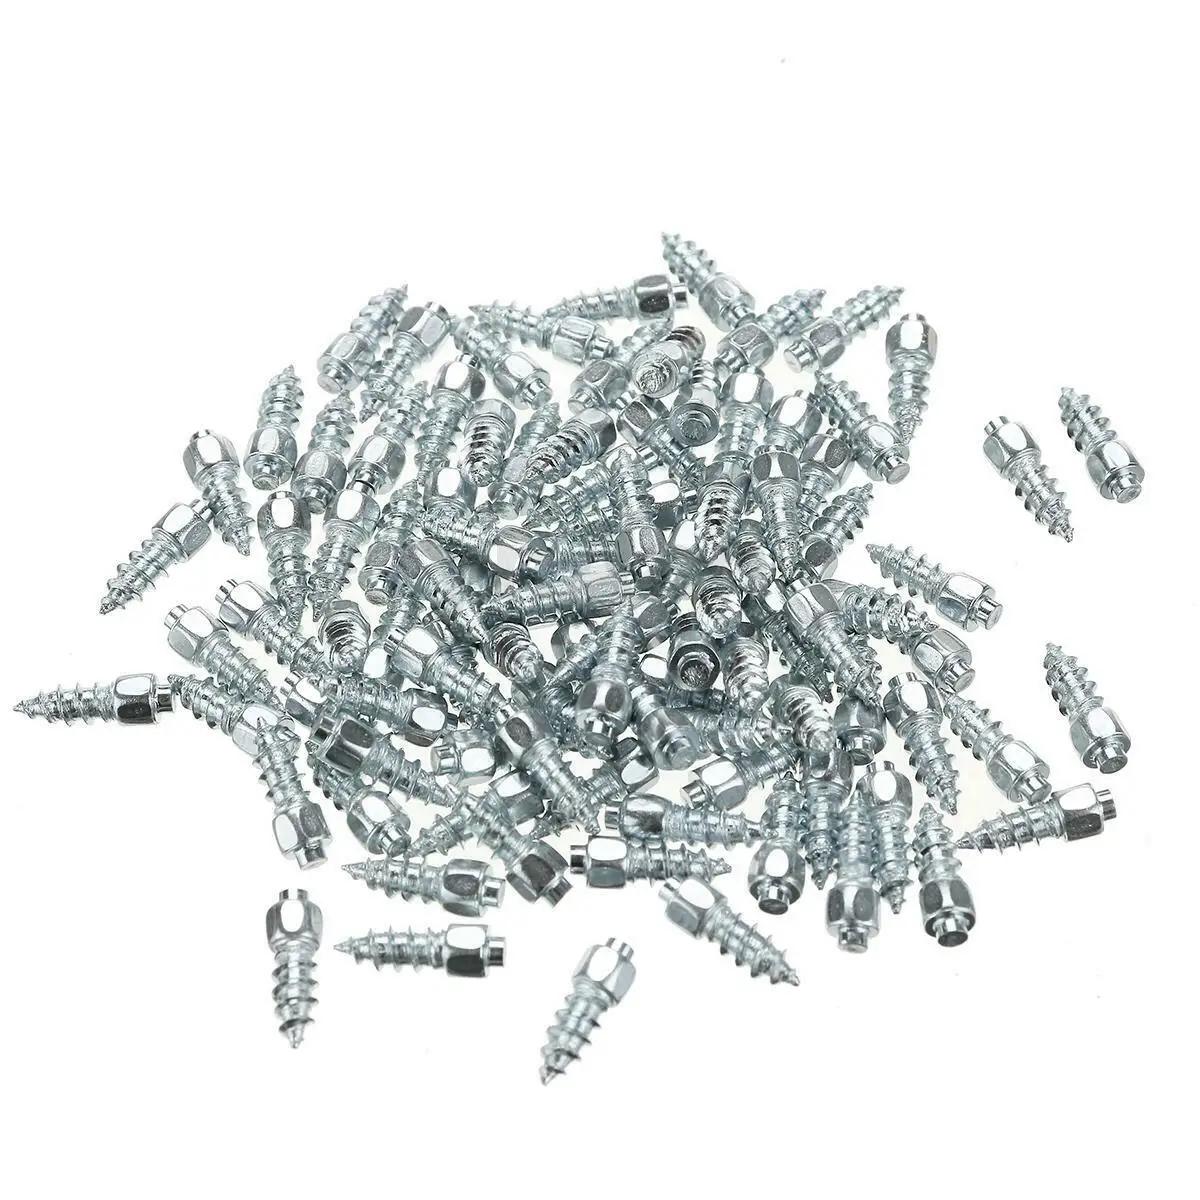 

100Pcs Car Tire Studs Anti-Slip Screws Nails Auto Motorcycle Bike Truck Off-road Tyre Anti-ice Spikes Snow Shoes Sole Cleats